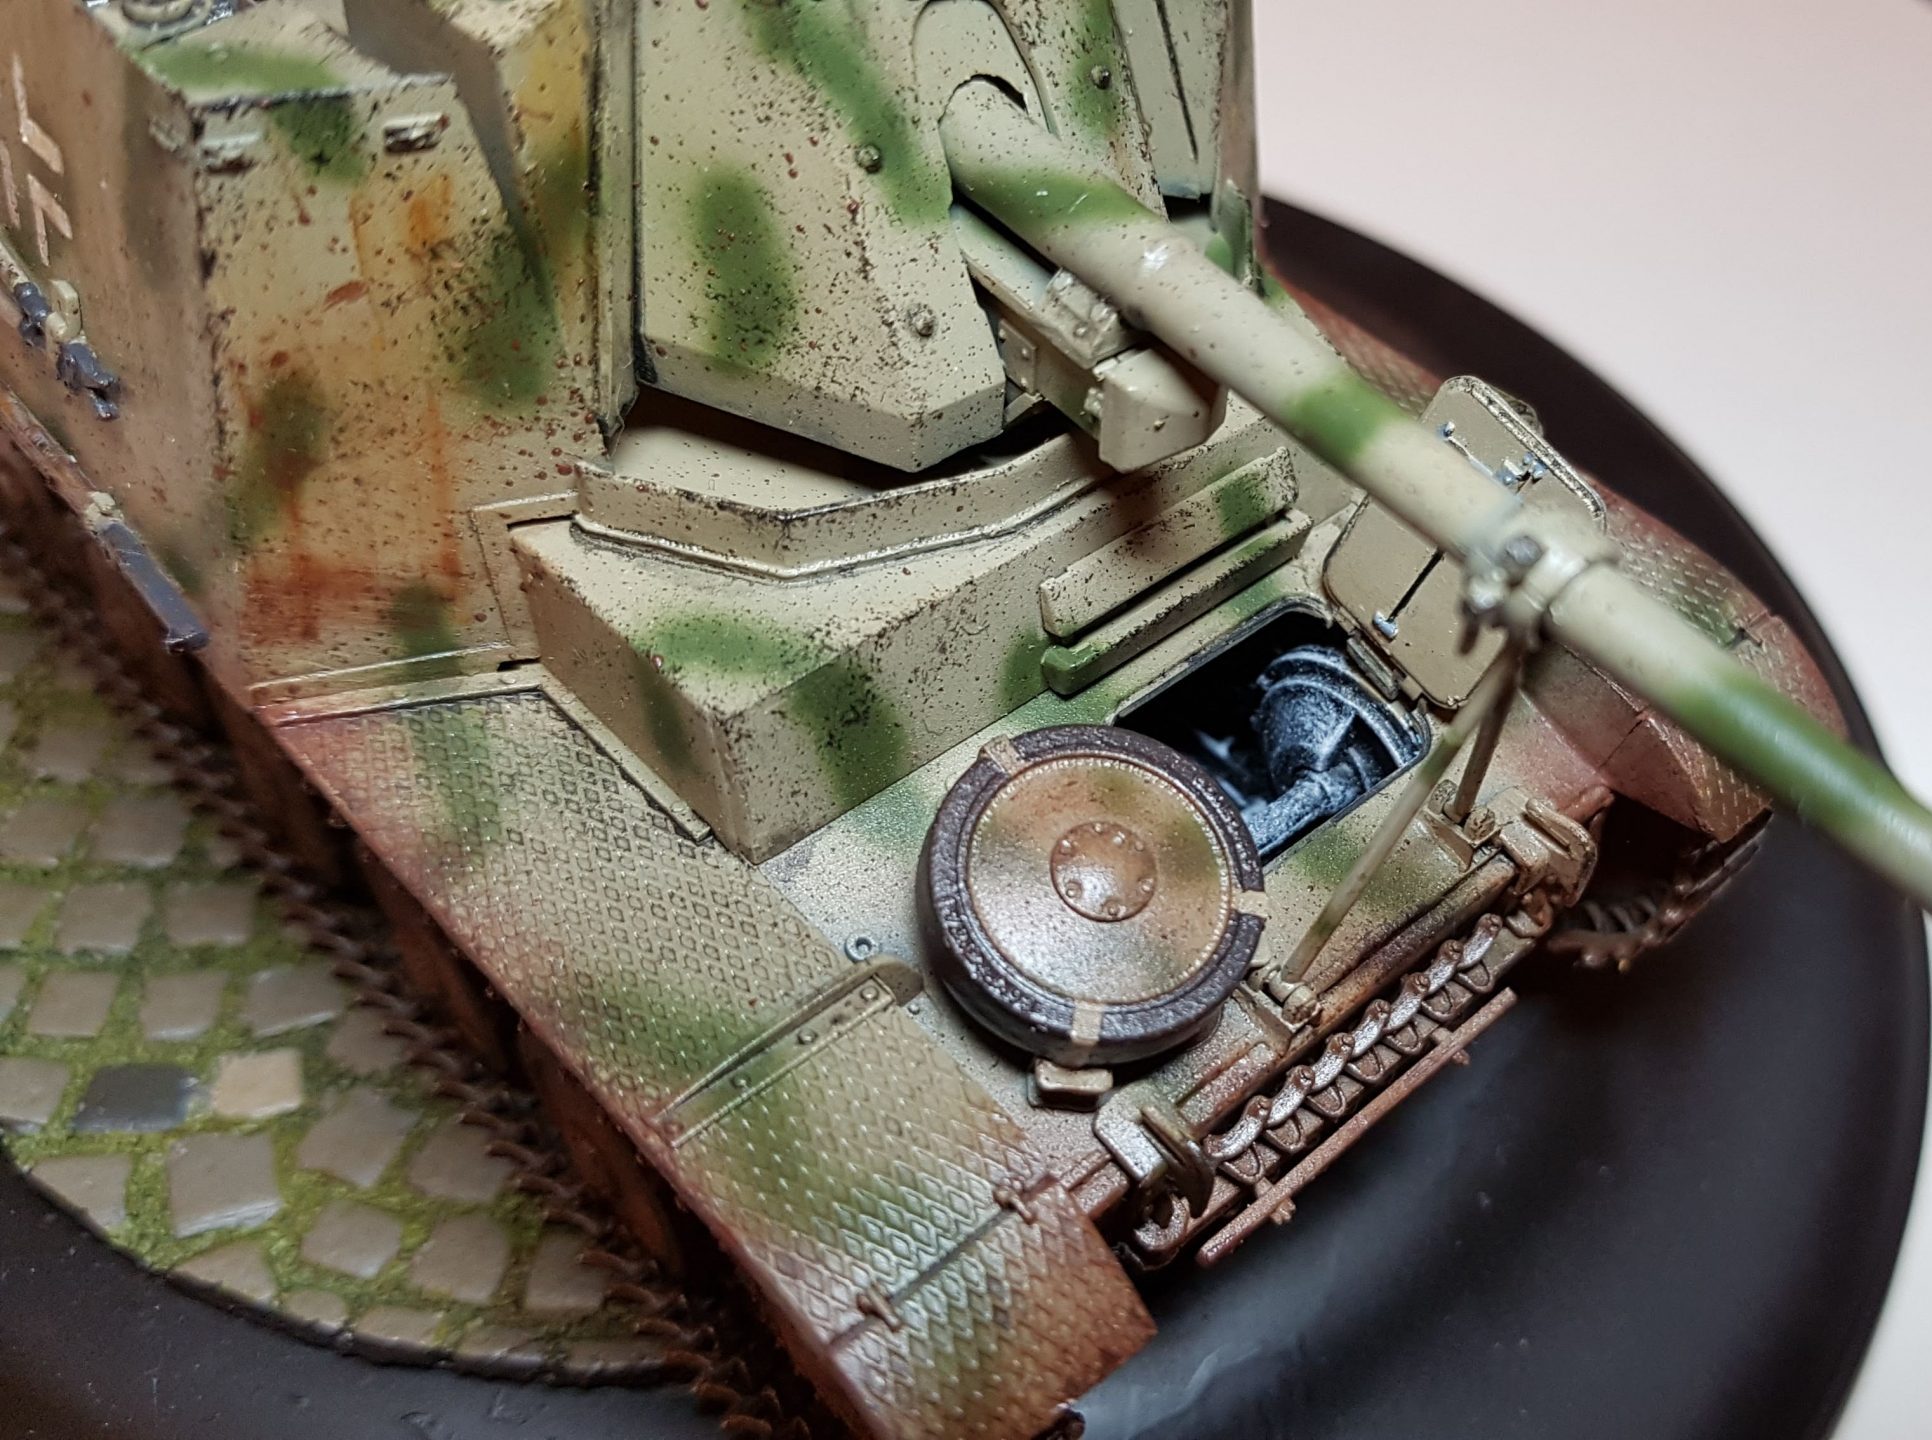 Marder 2 (WW2) - View 3 - 1/35 Scale - Built By Wright Built - Dragon Models